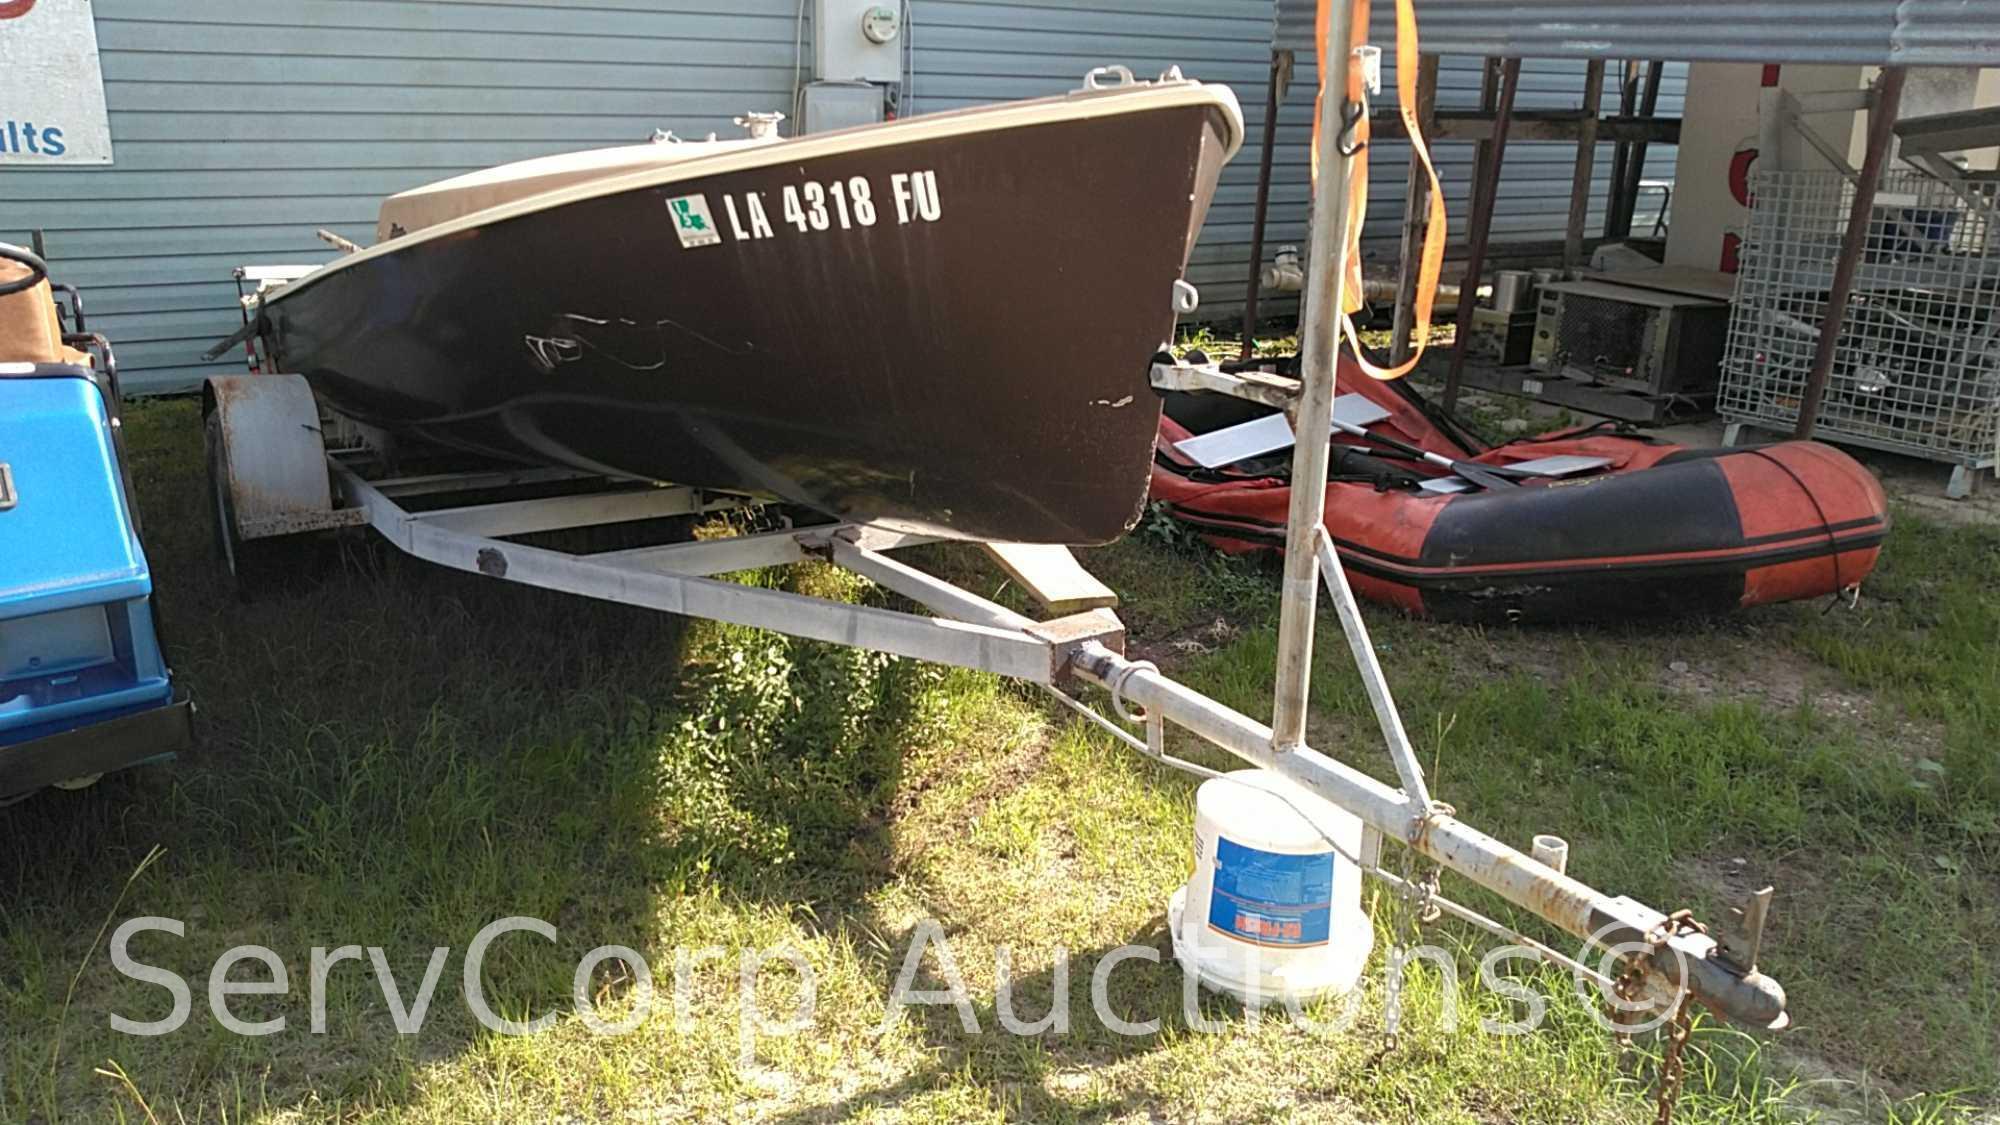 Abandoned Sail Boat with Trailer, No Paperwork, As Is (Private Seller)